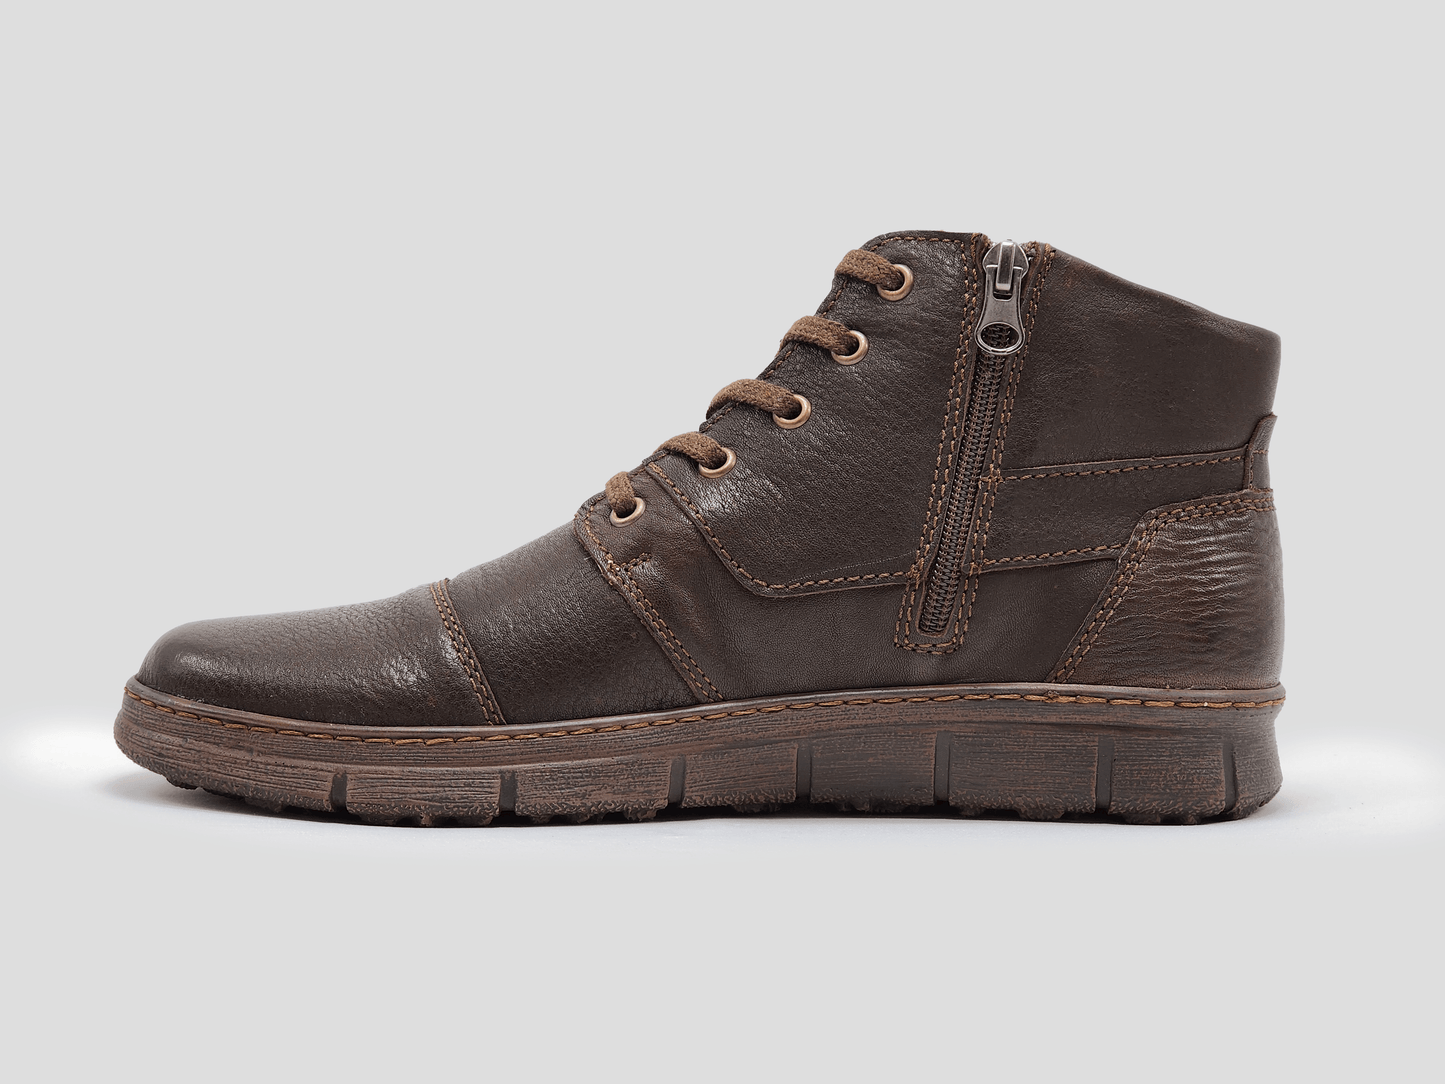 Men's Everyday Wool-Lined Zip-Up Leather Boots - Brown - Kacper Global Shoes 